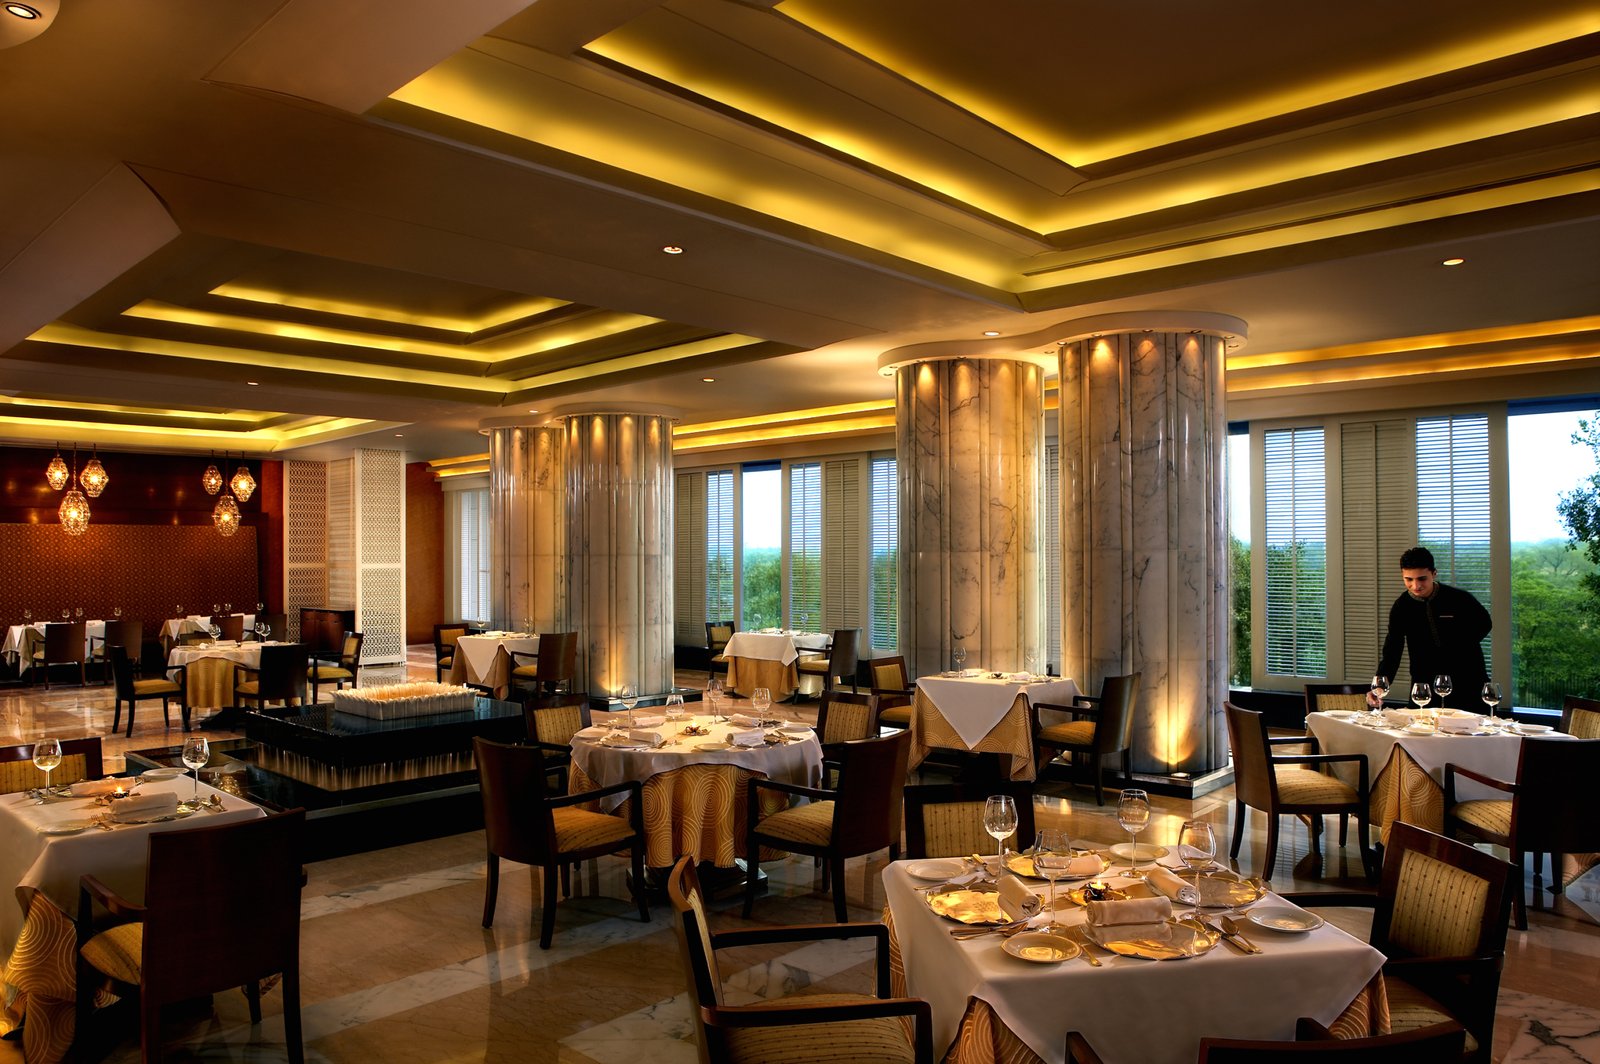 Taste the richness of the North West Frontier at Diya